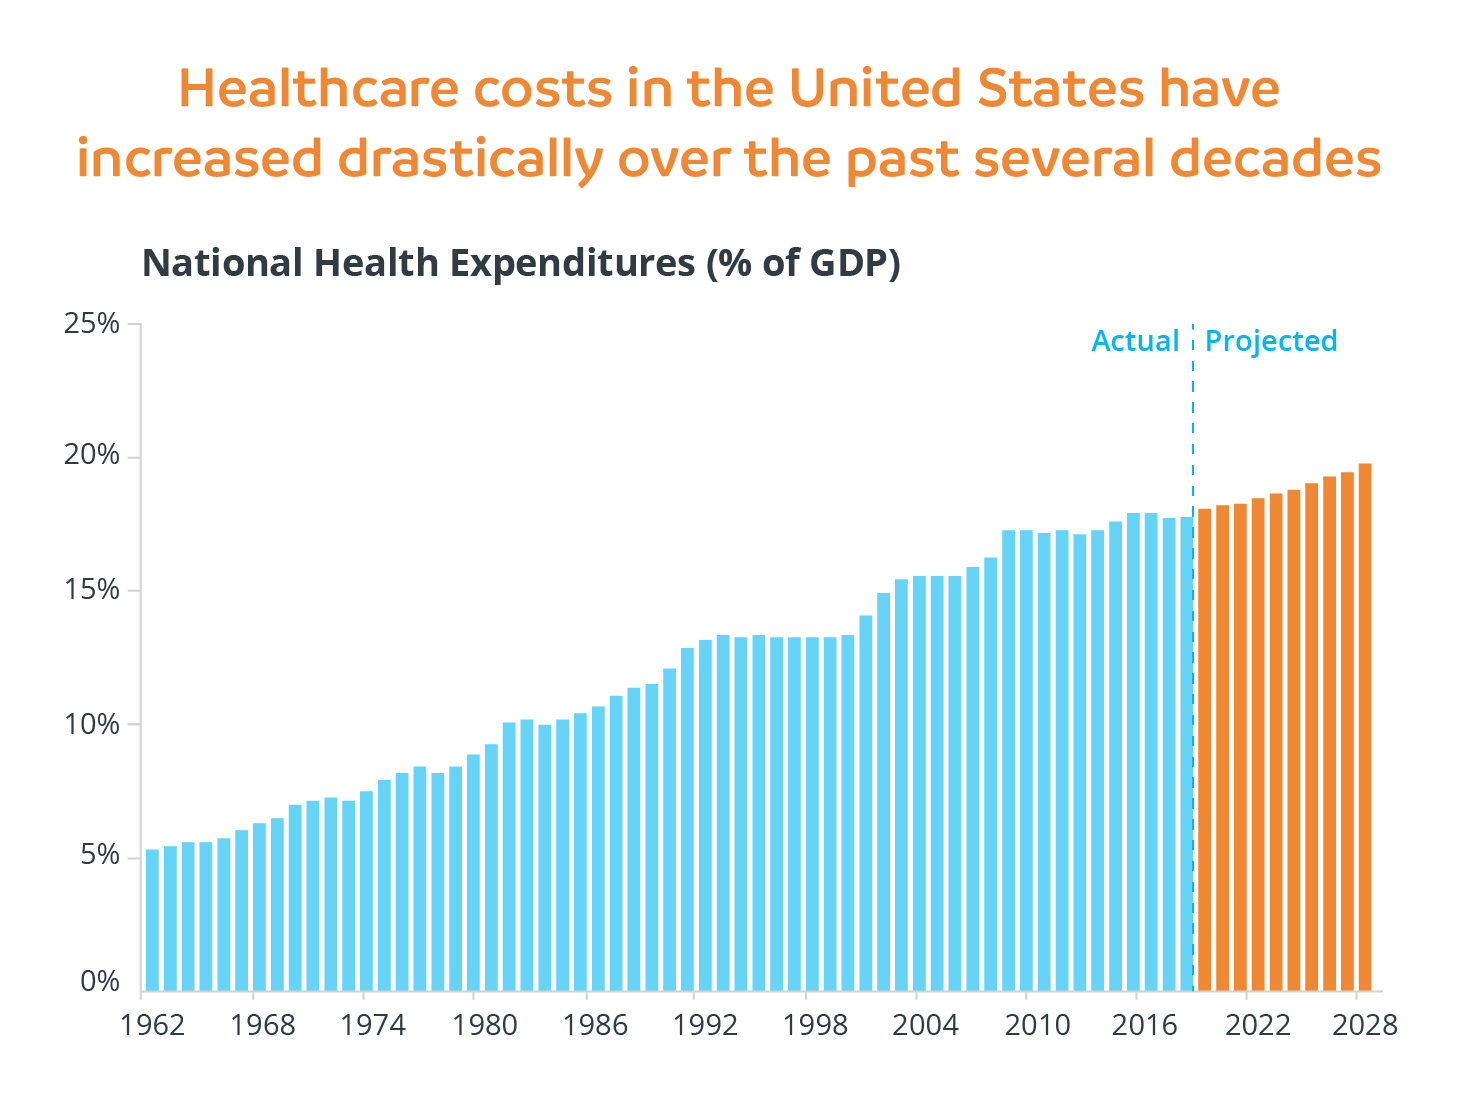 Healthcare costs in the United States have increased drastically over the past several decades